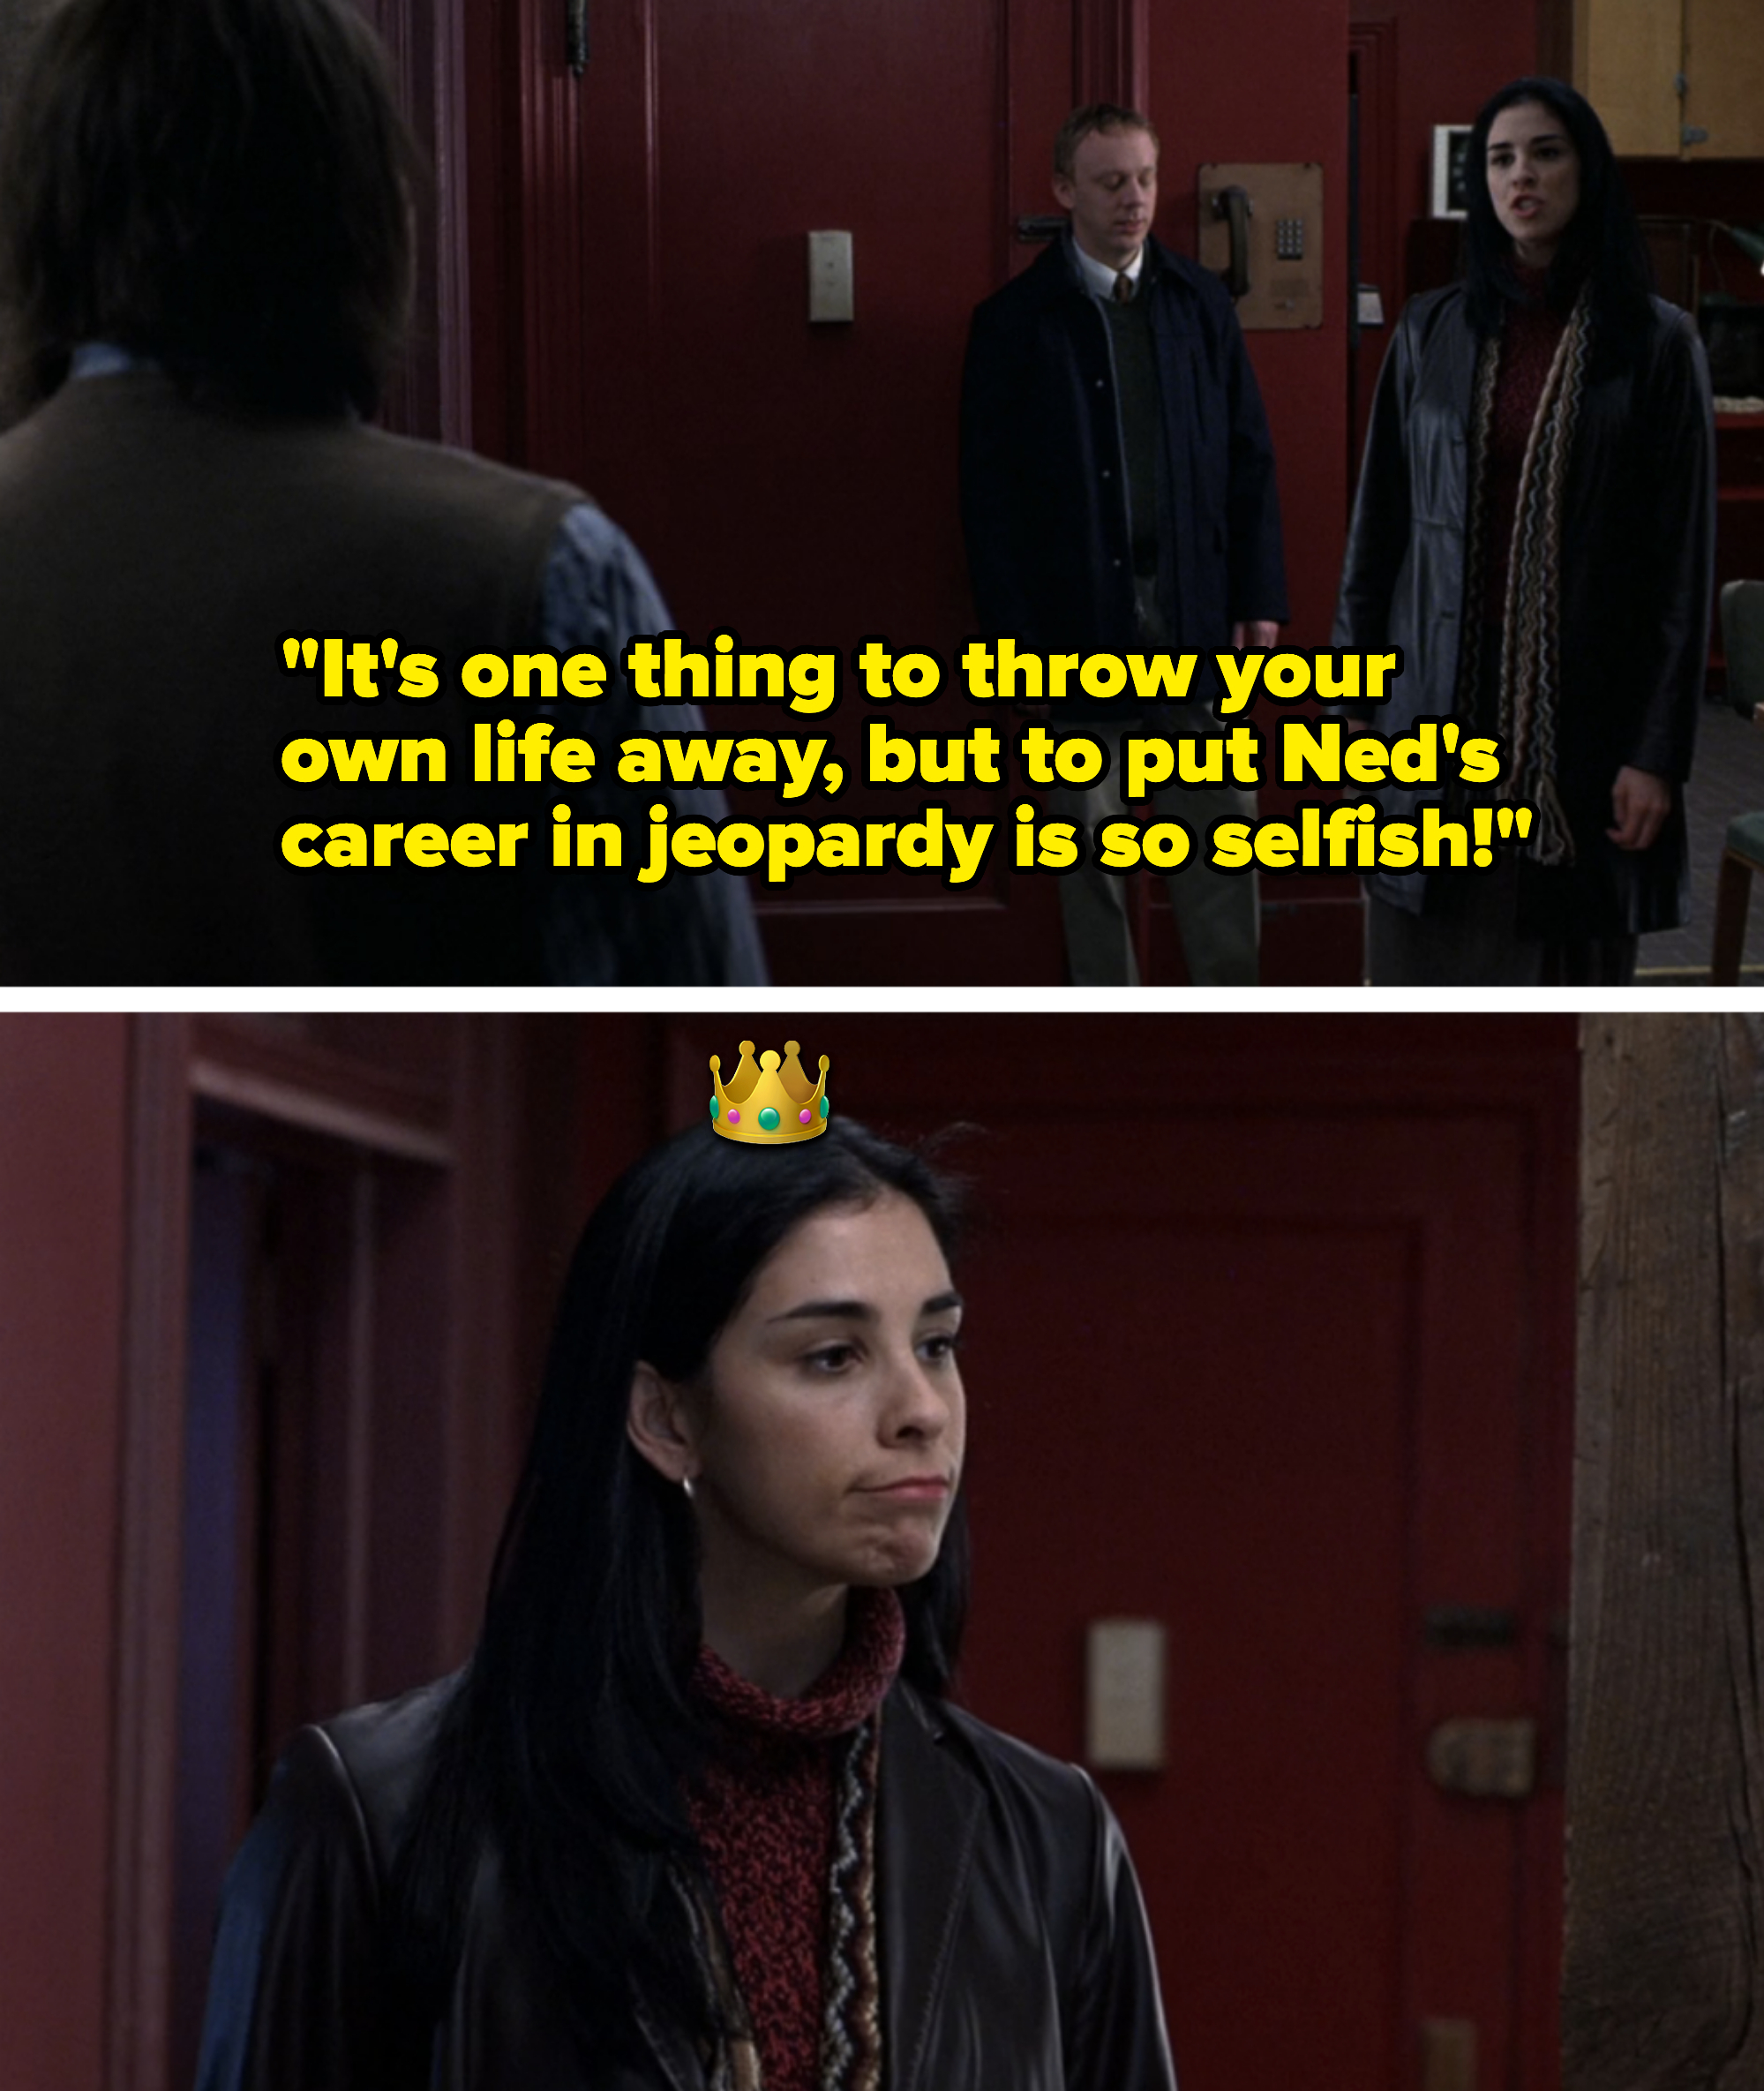 patty saying, it's one thing to throw your own life away, but to put ned's career in jeopardy is so selfish